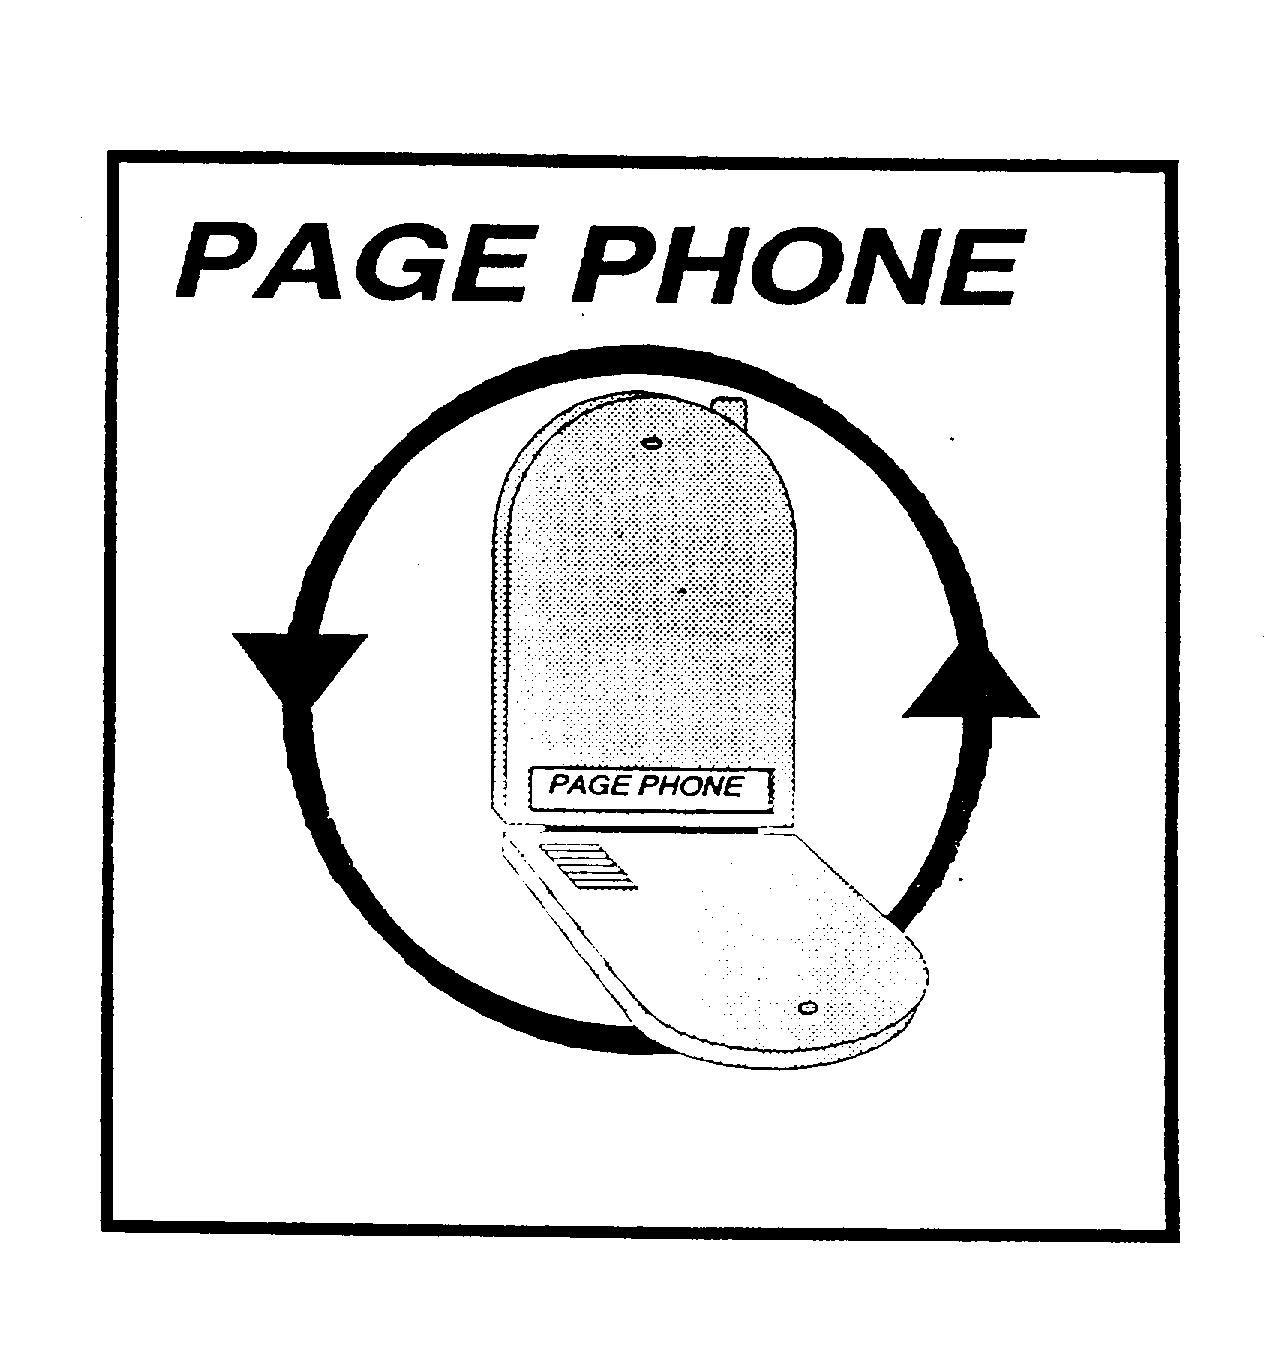  PAGE PHONE